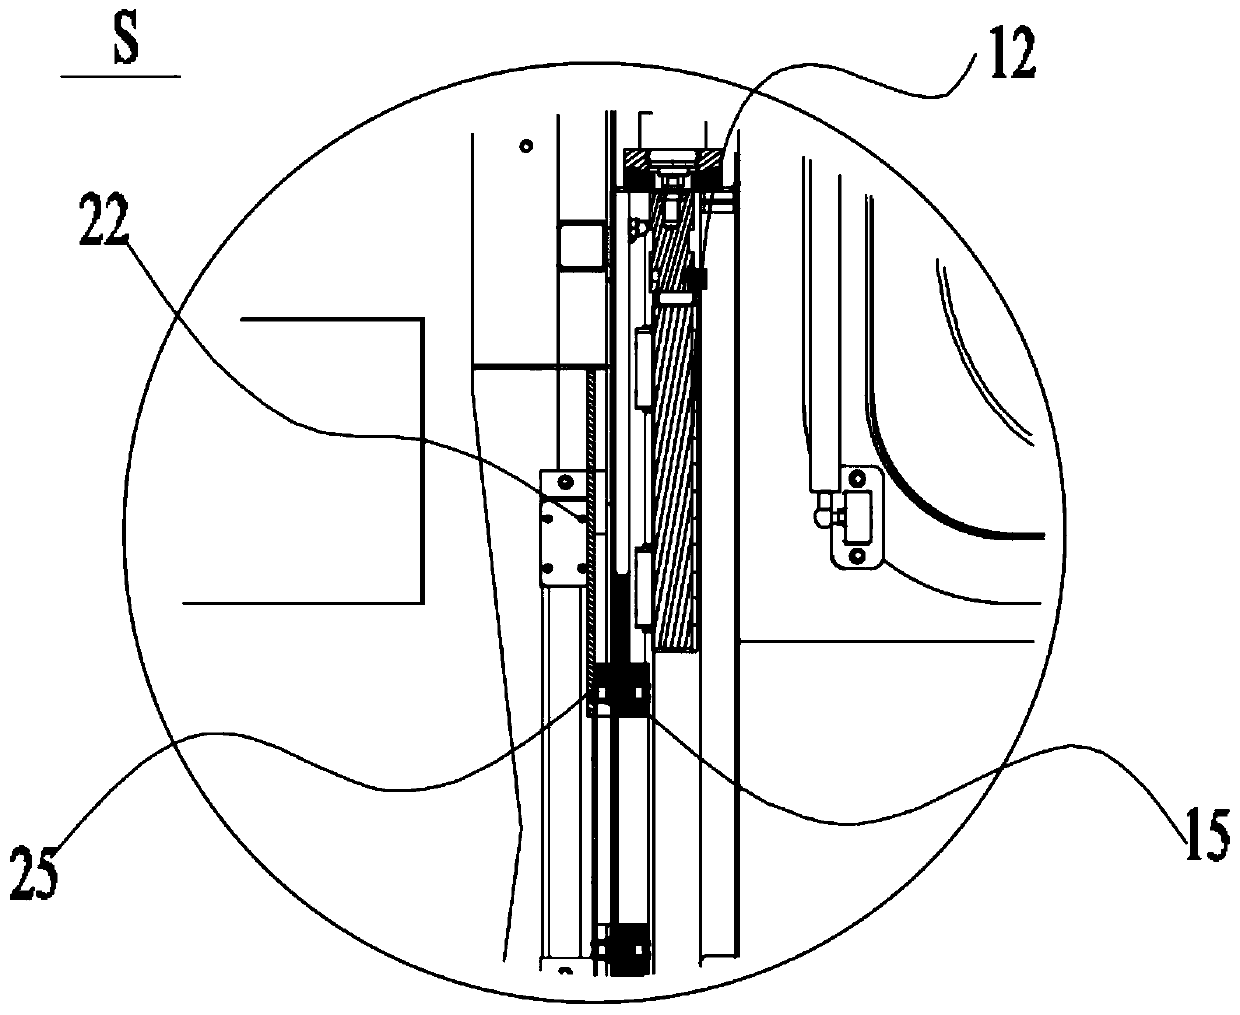 Double-layer automatic sealing door structure